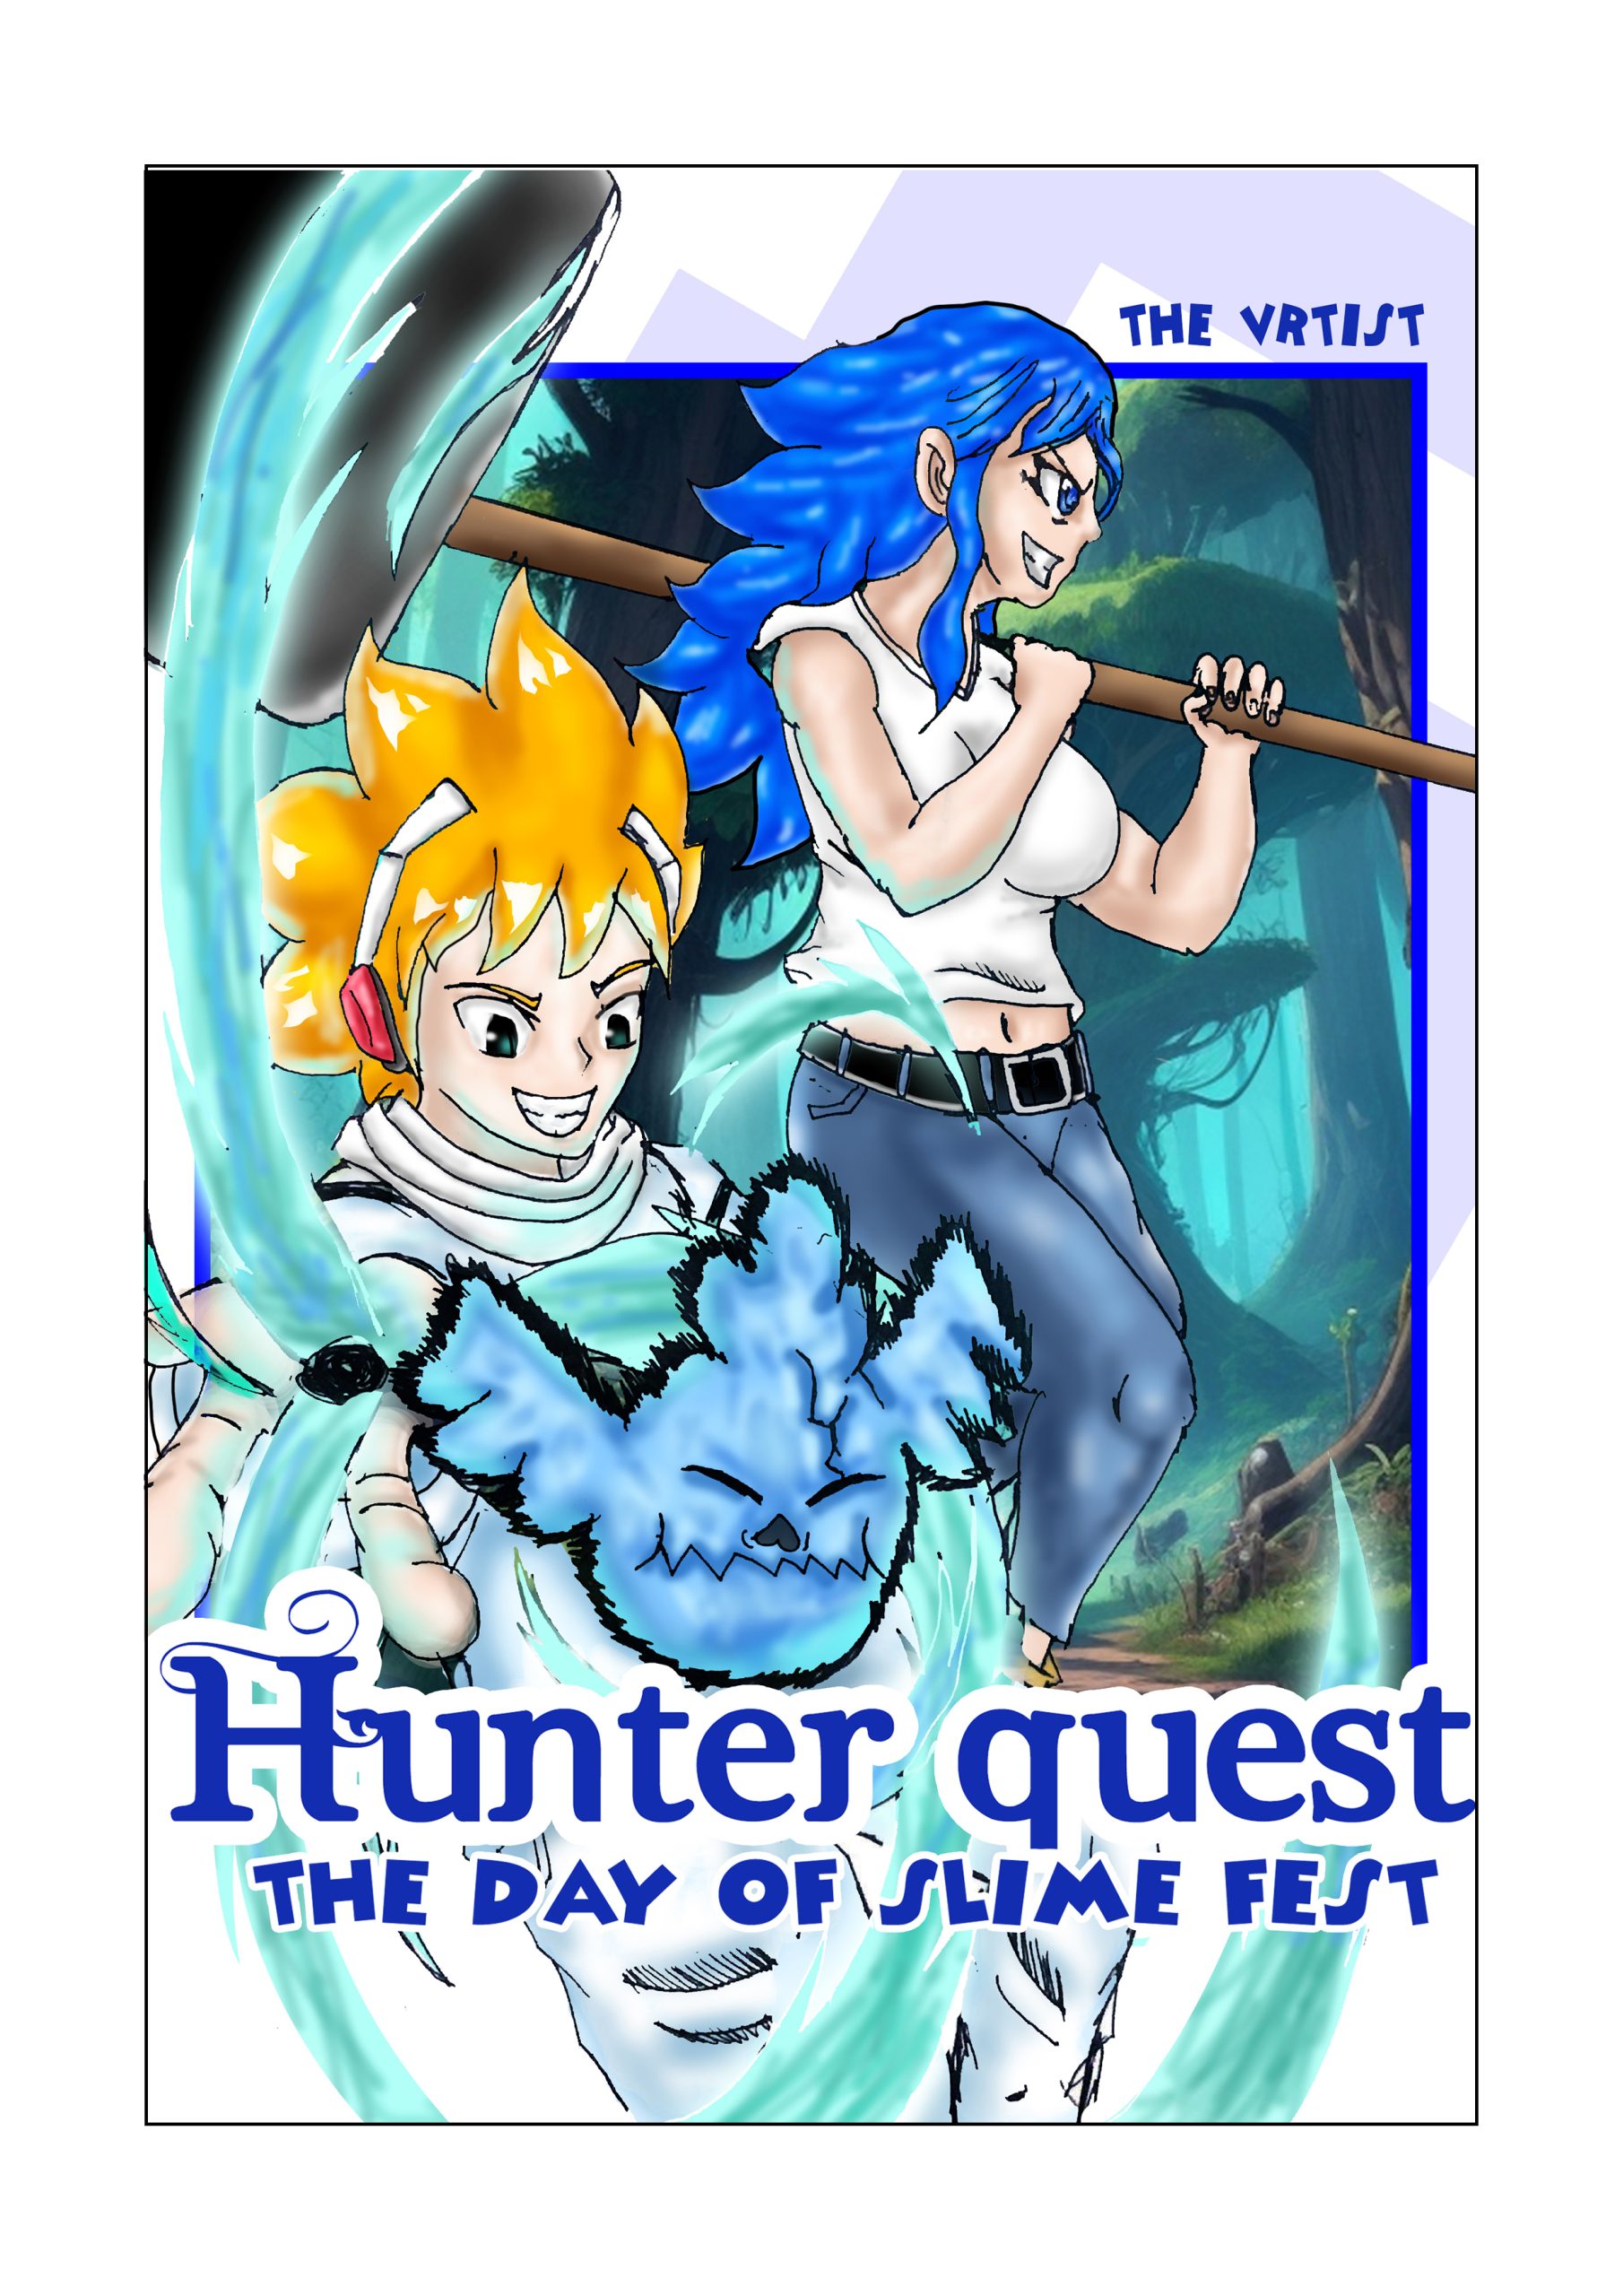 TITRE : HUNTER QUEST the day of slime fest